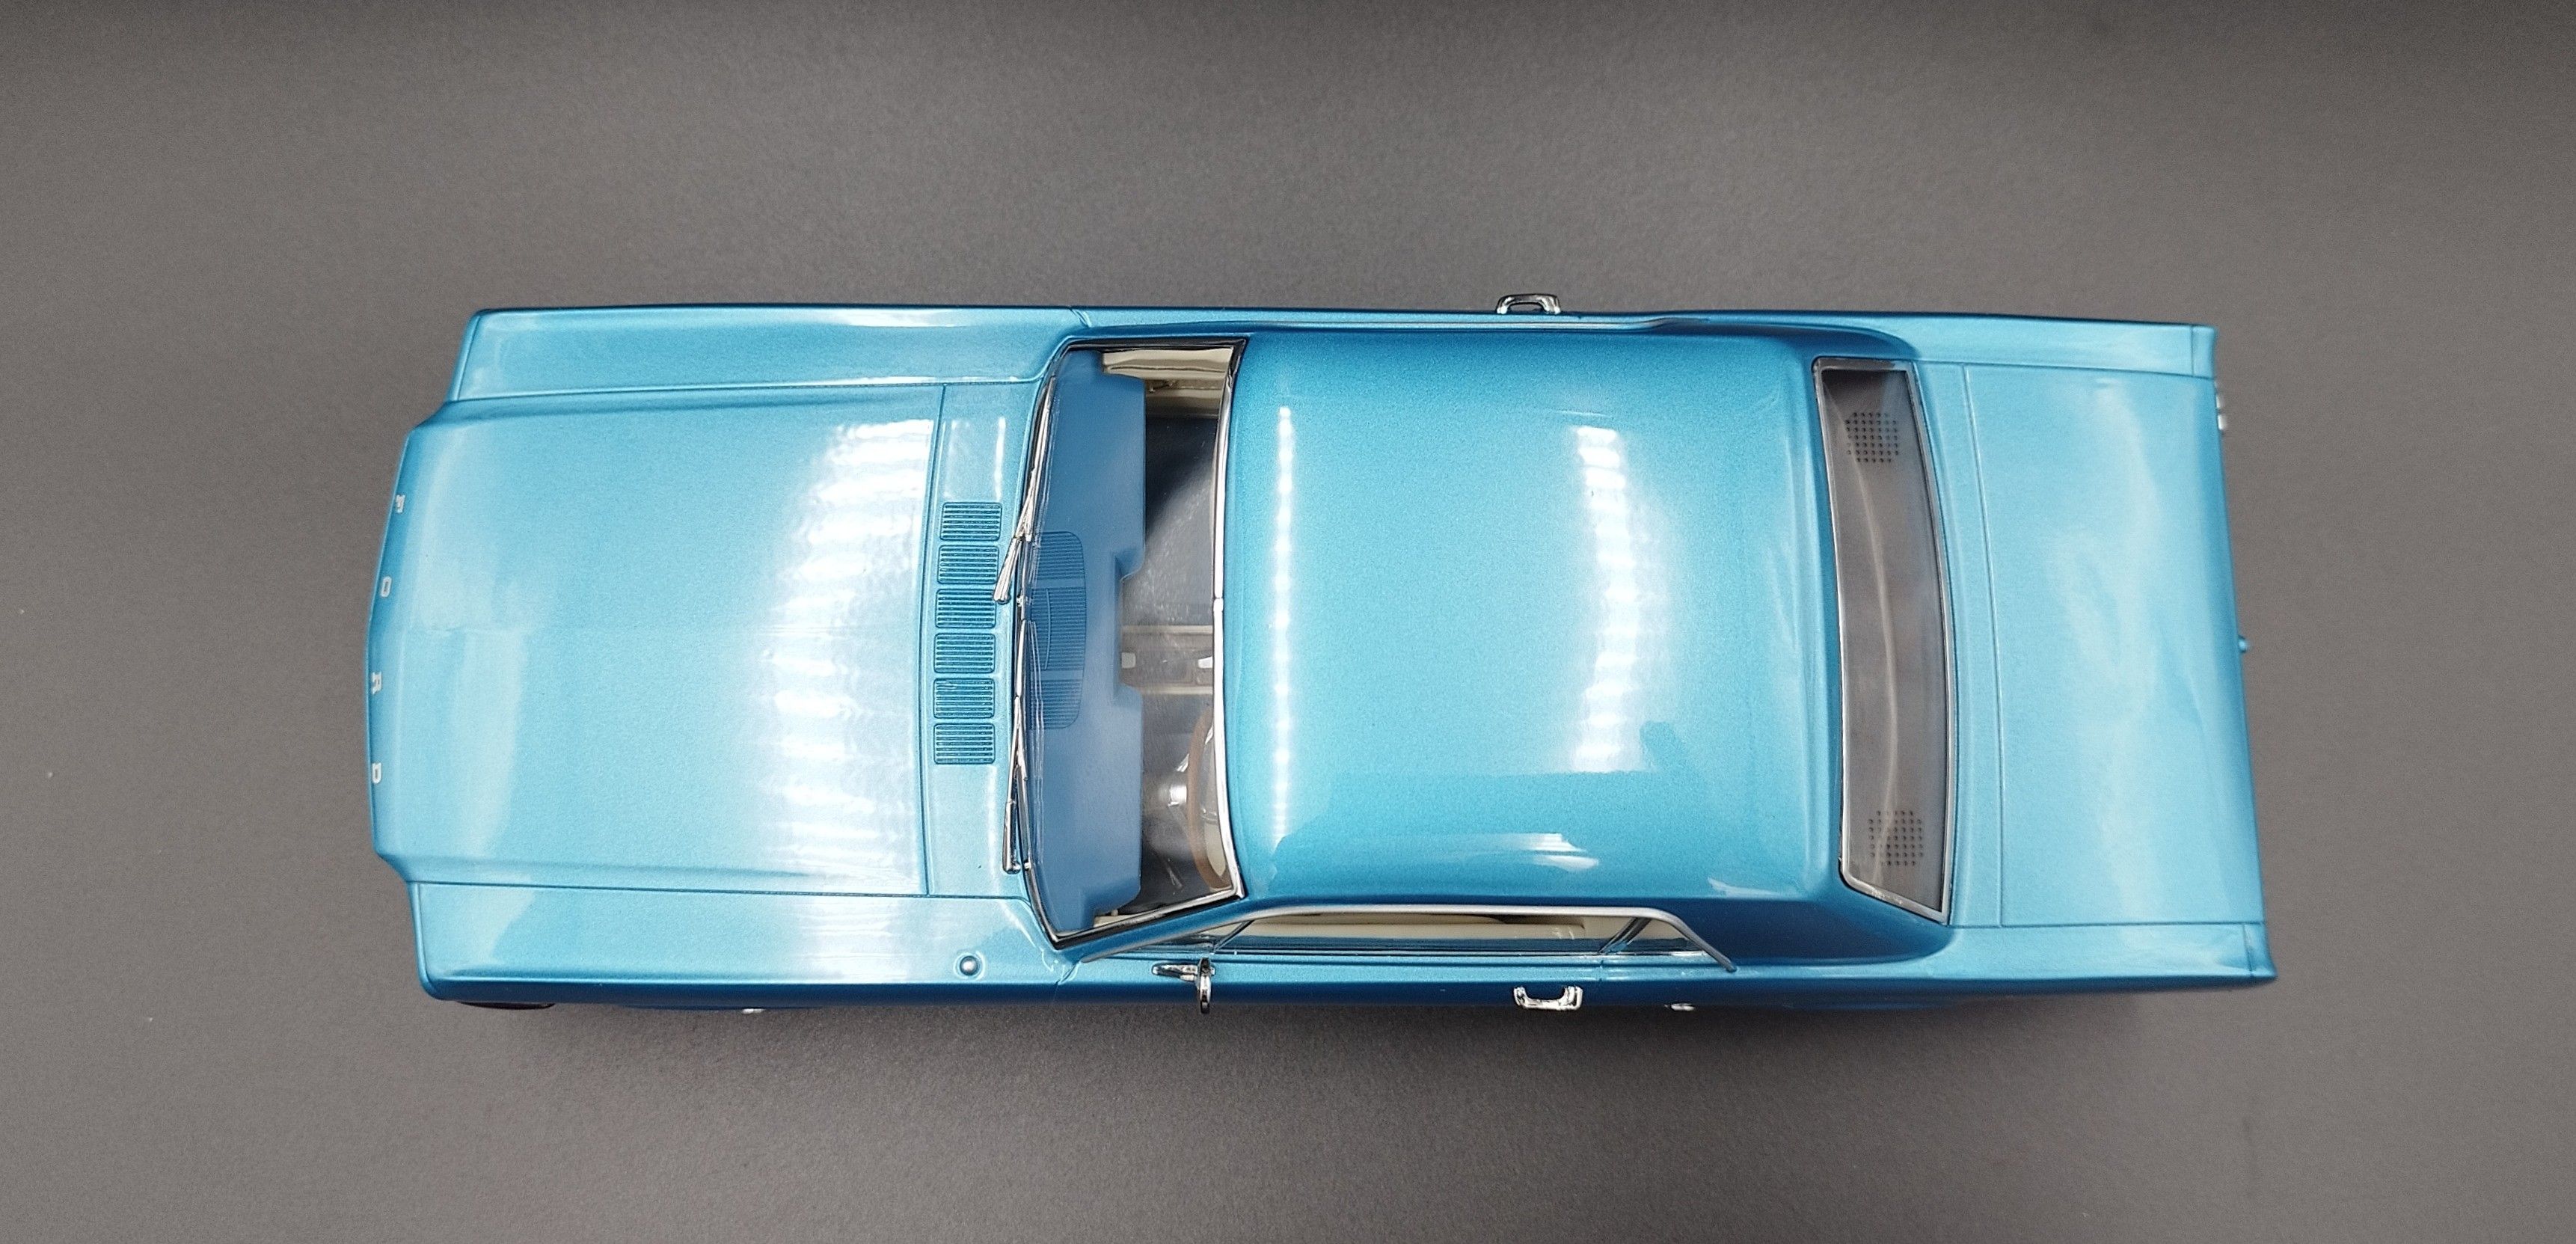 1:18 Norerv 1965 Ford Mustang Coupe model nowy